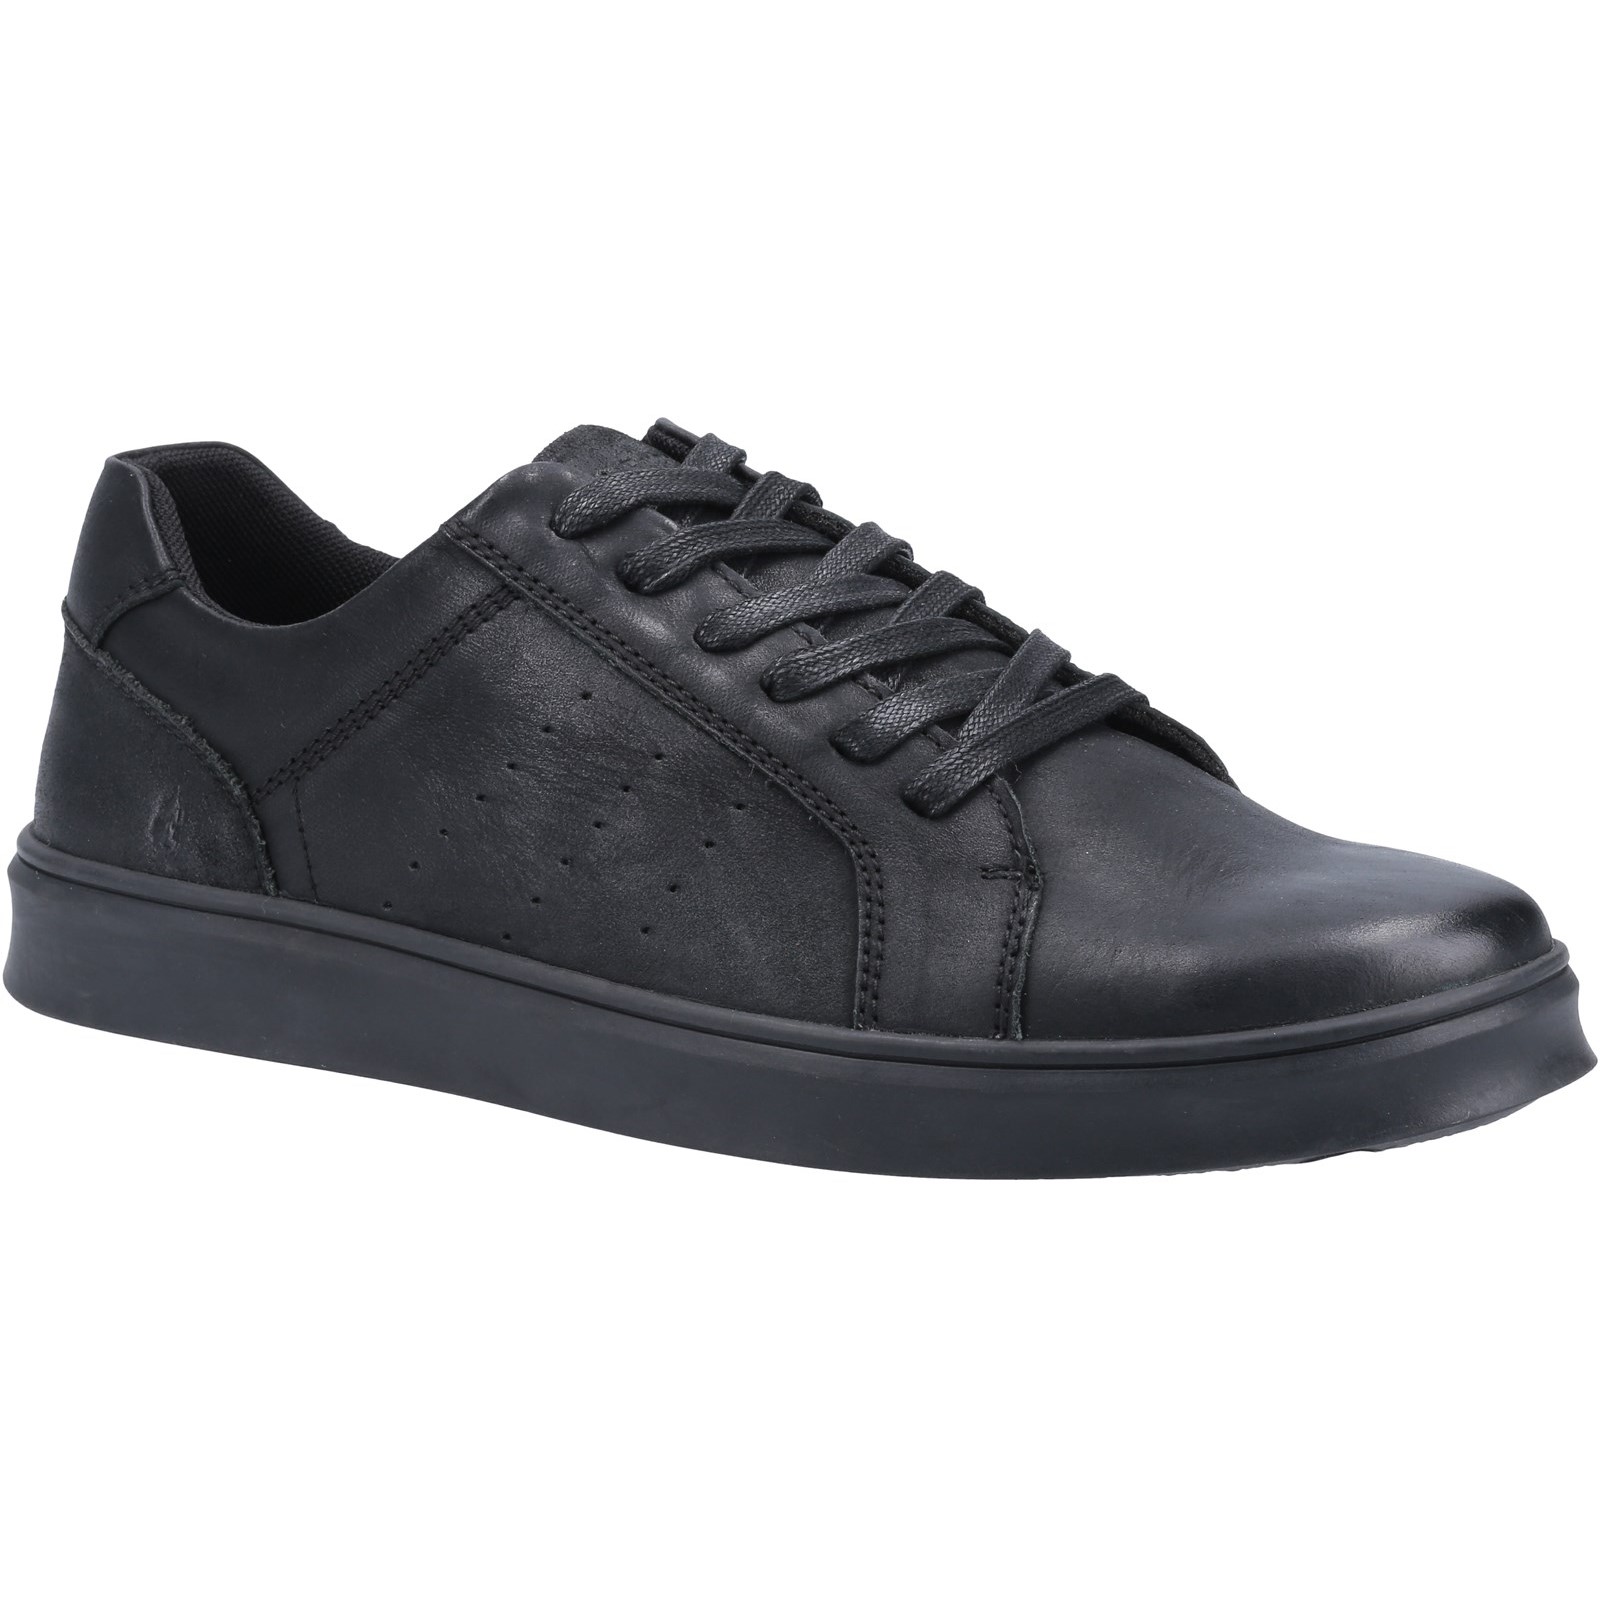 Hush Puppies Men's Mason Leather Lace Up Casual Trainers Shoes - UK 8